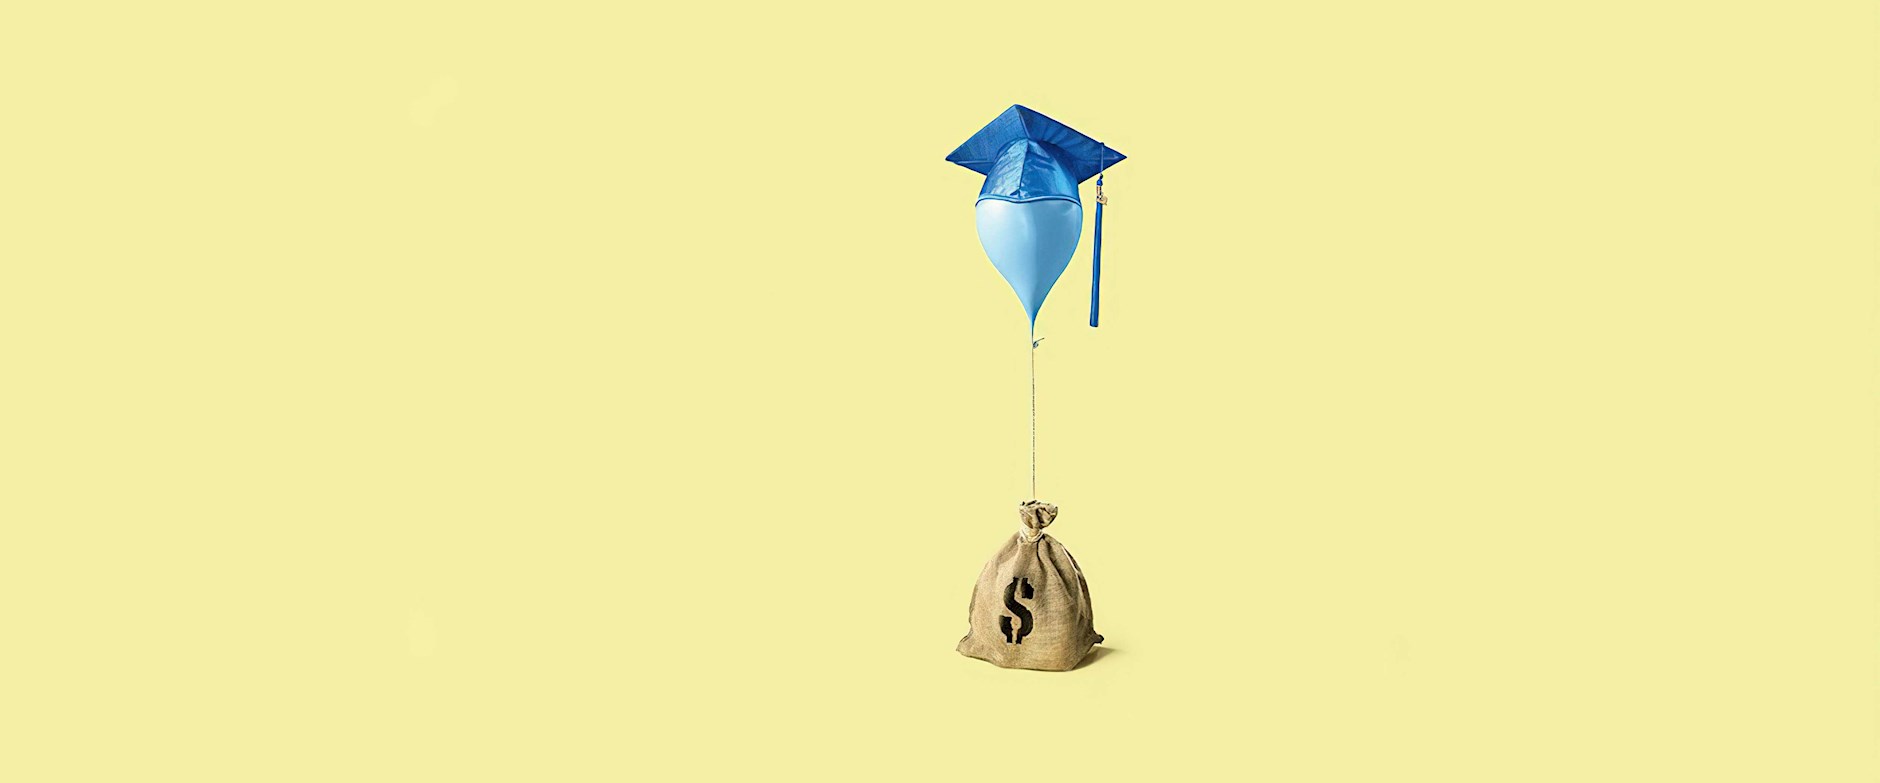 A balloon with a graduation cap tied to a large bag of money